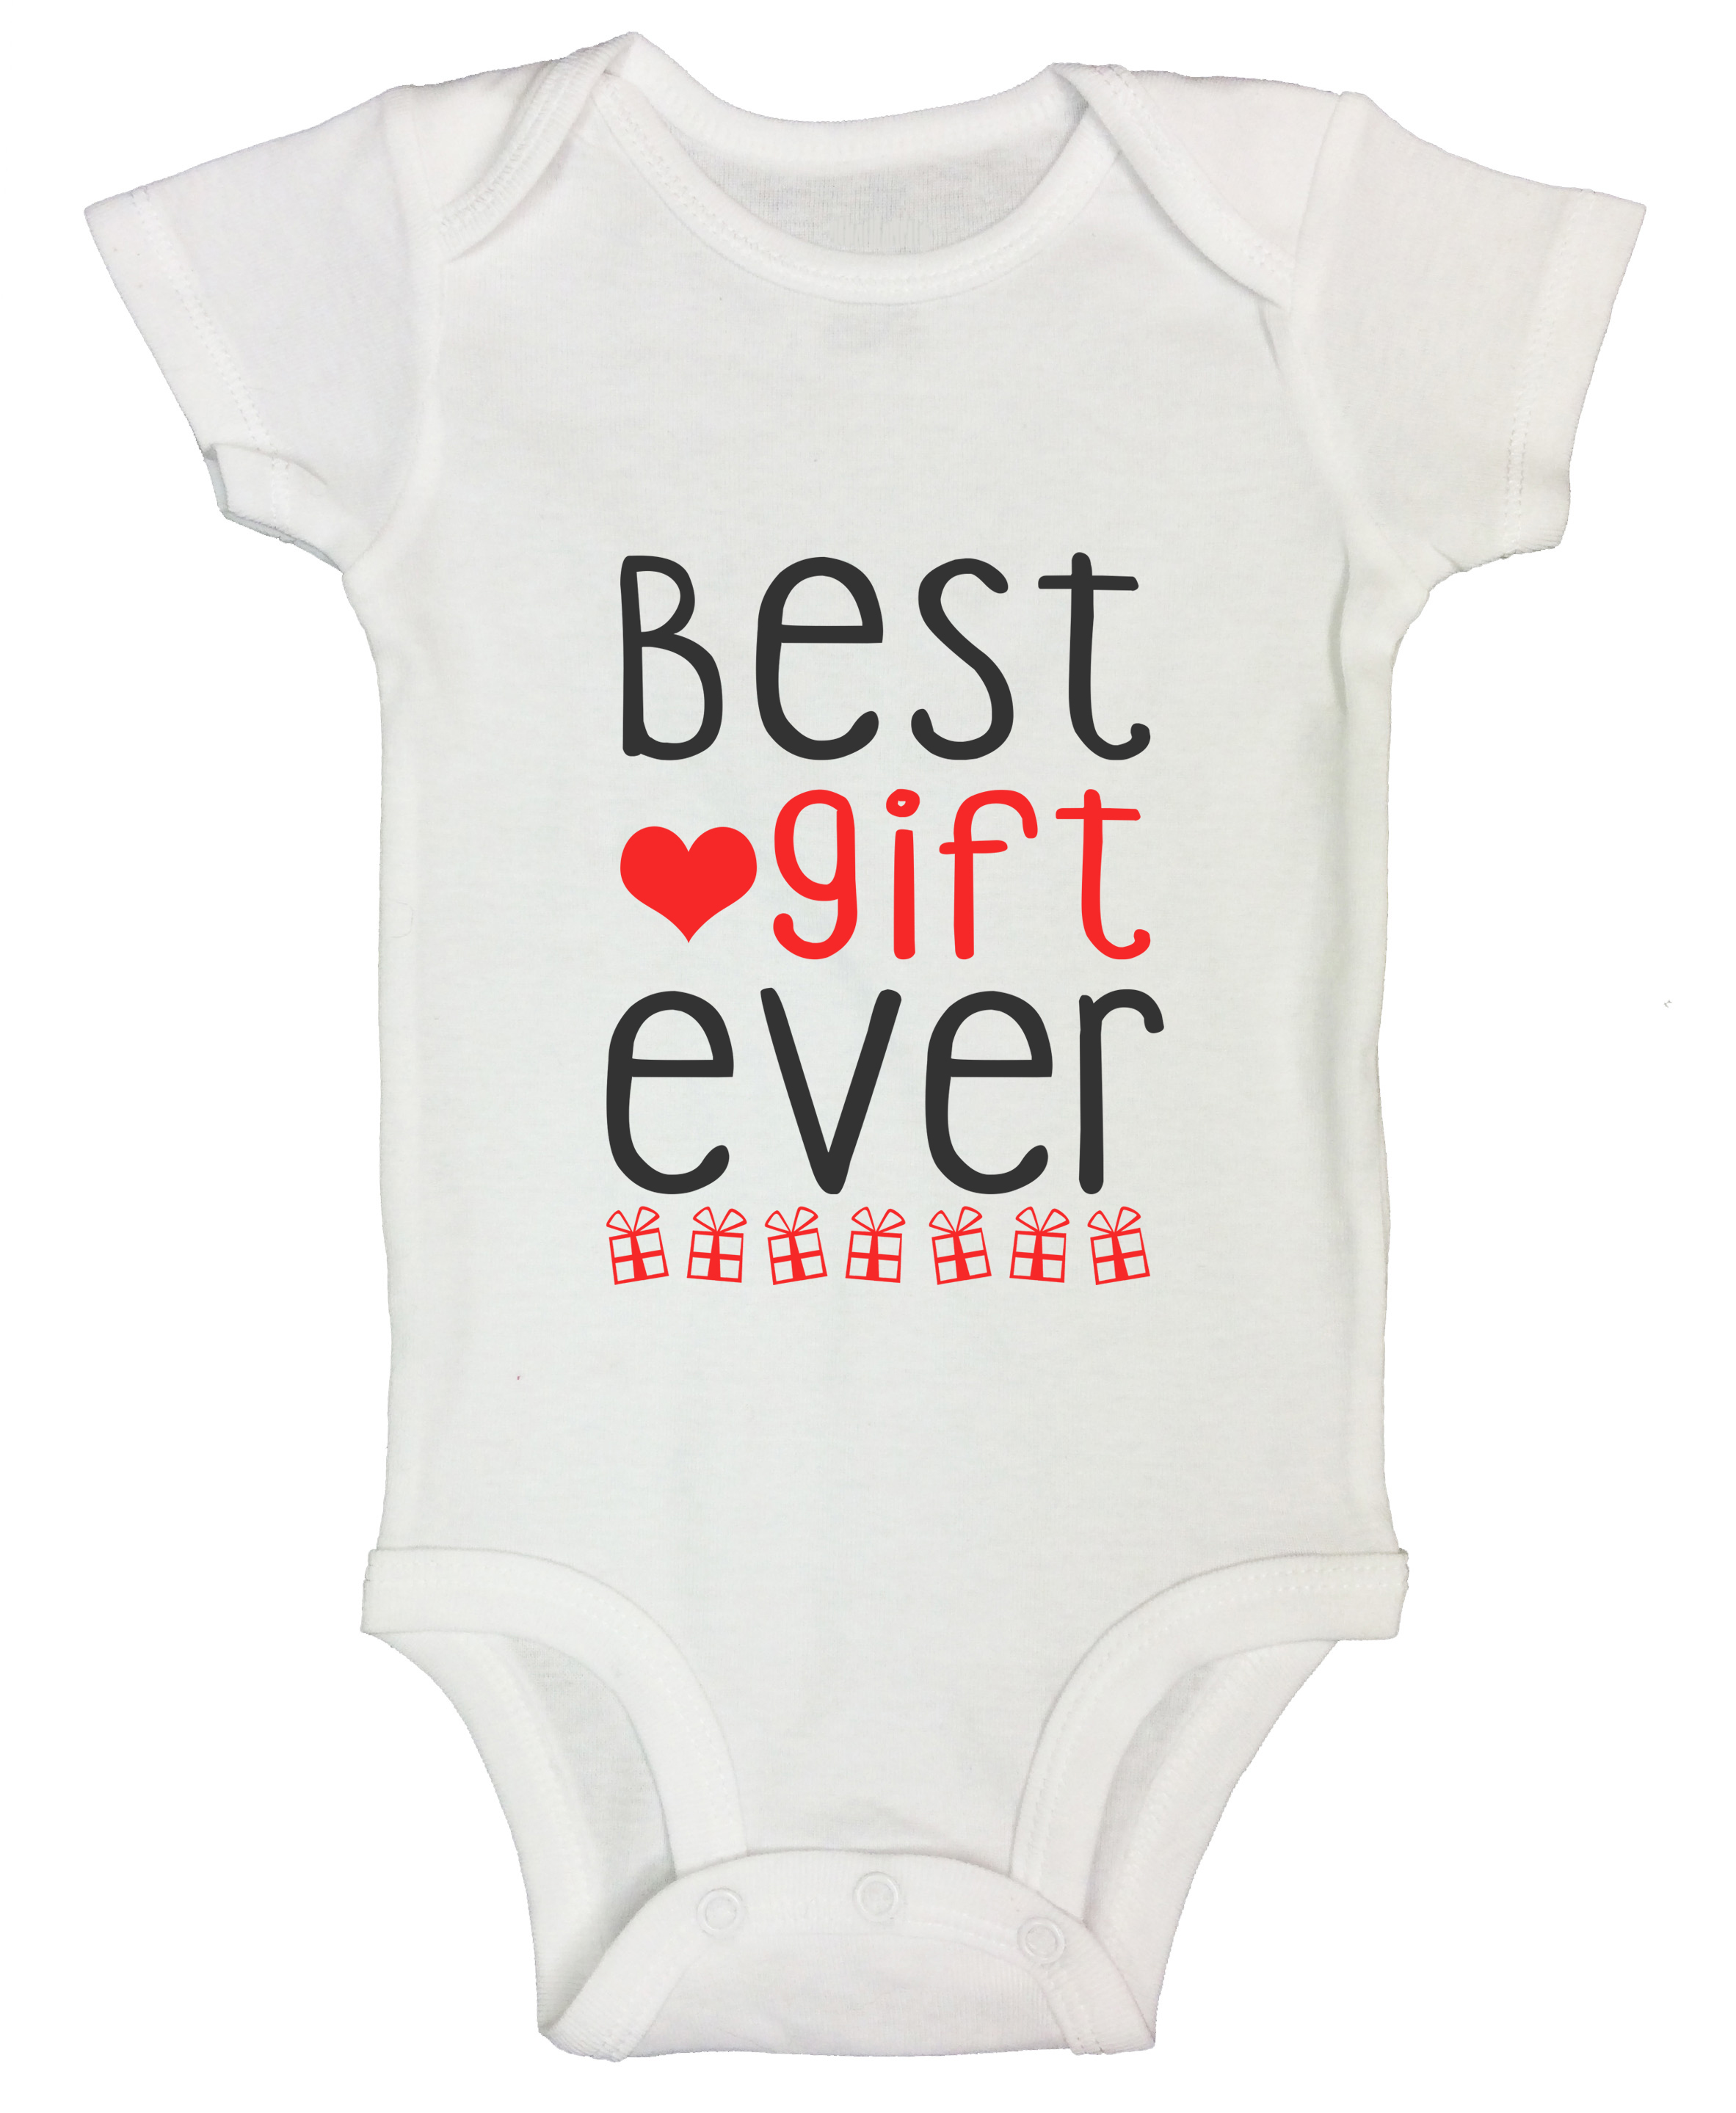 Toddler Tee baby gifts Christmas Infant Bodysuit infant childrens clothing Baby One Piece Infant /& toddler gifts toddler clothes